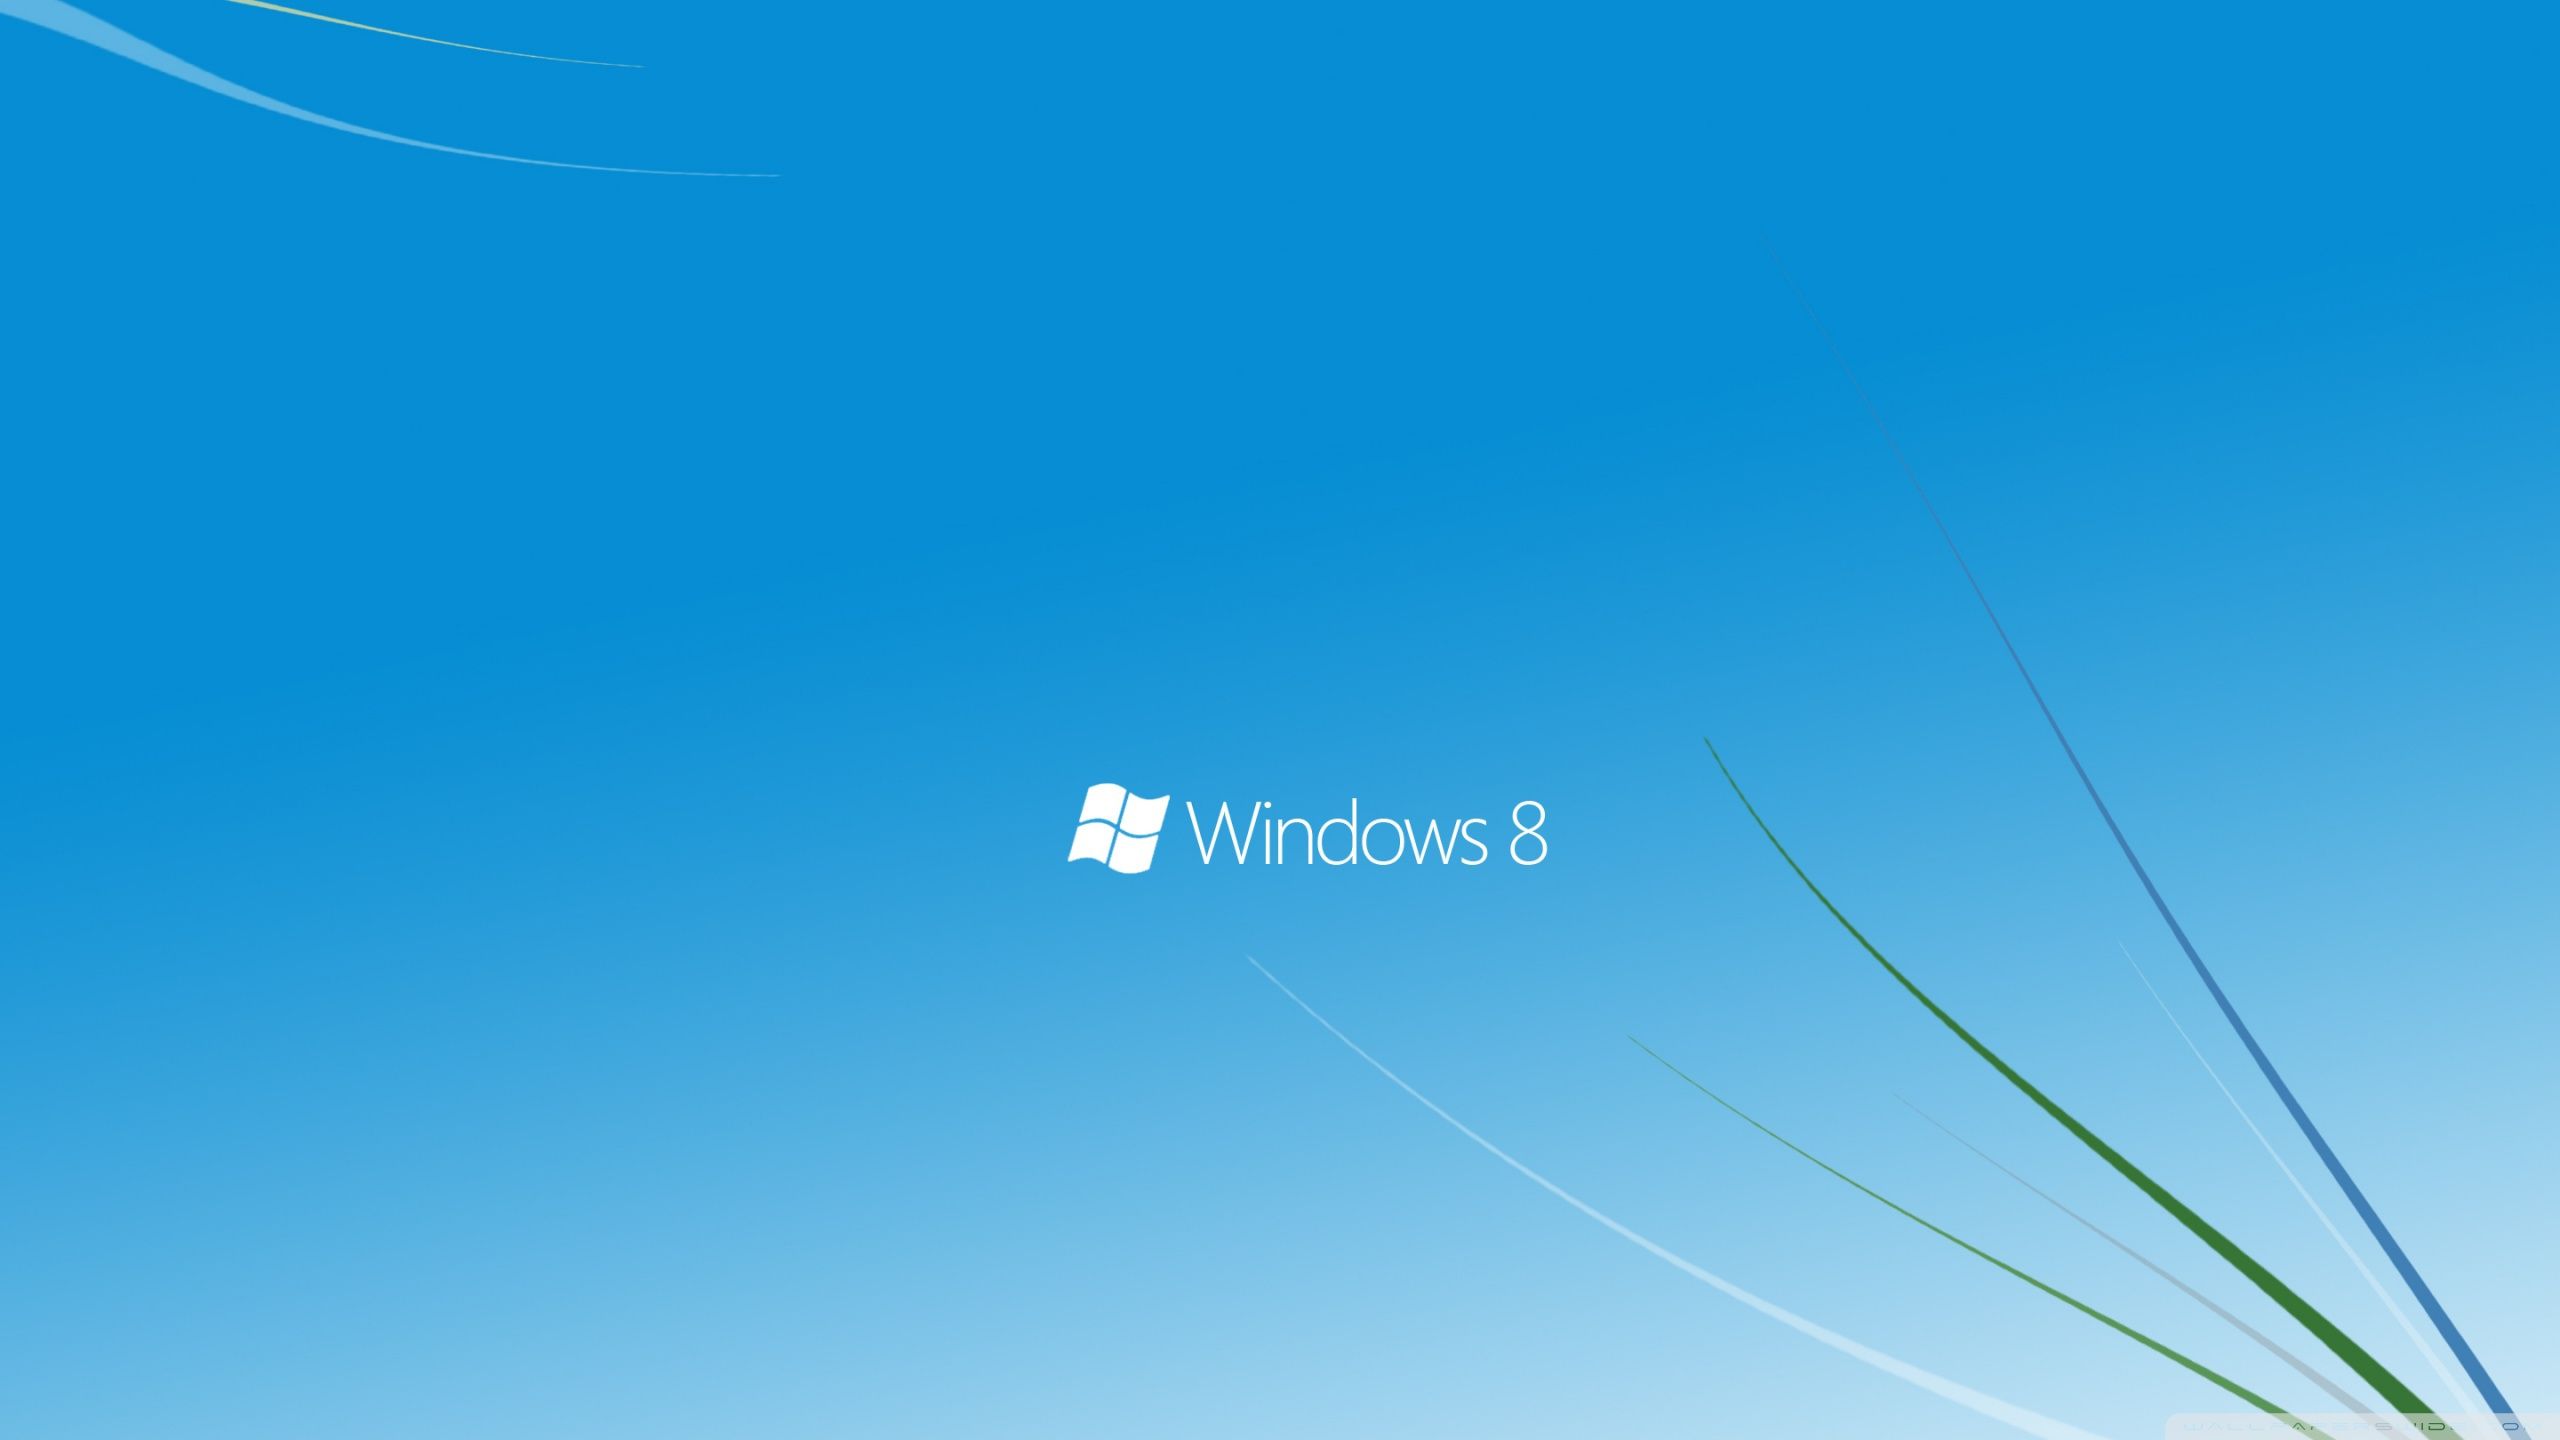 Windows 8 grass theme wallpapers and images - wallpapers, pictures ...